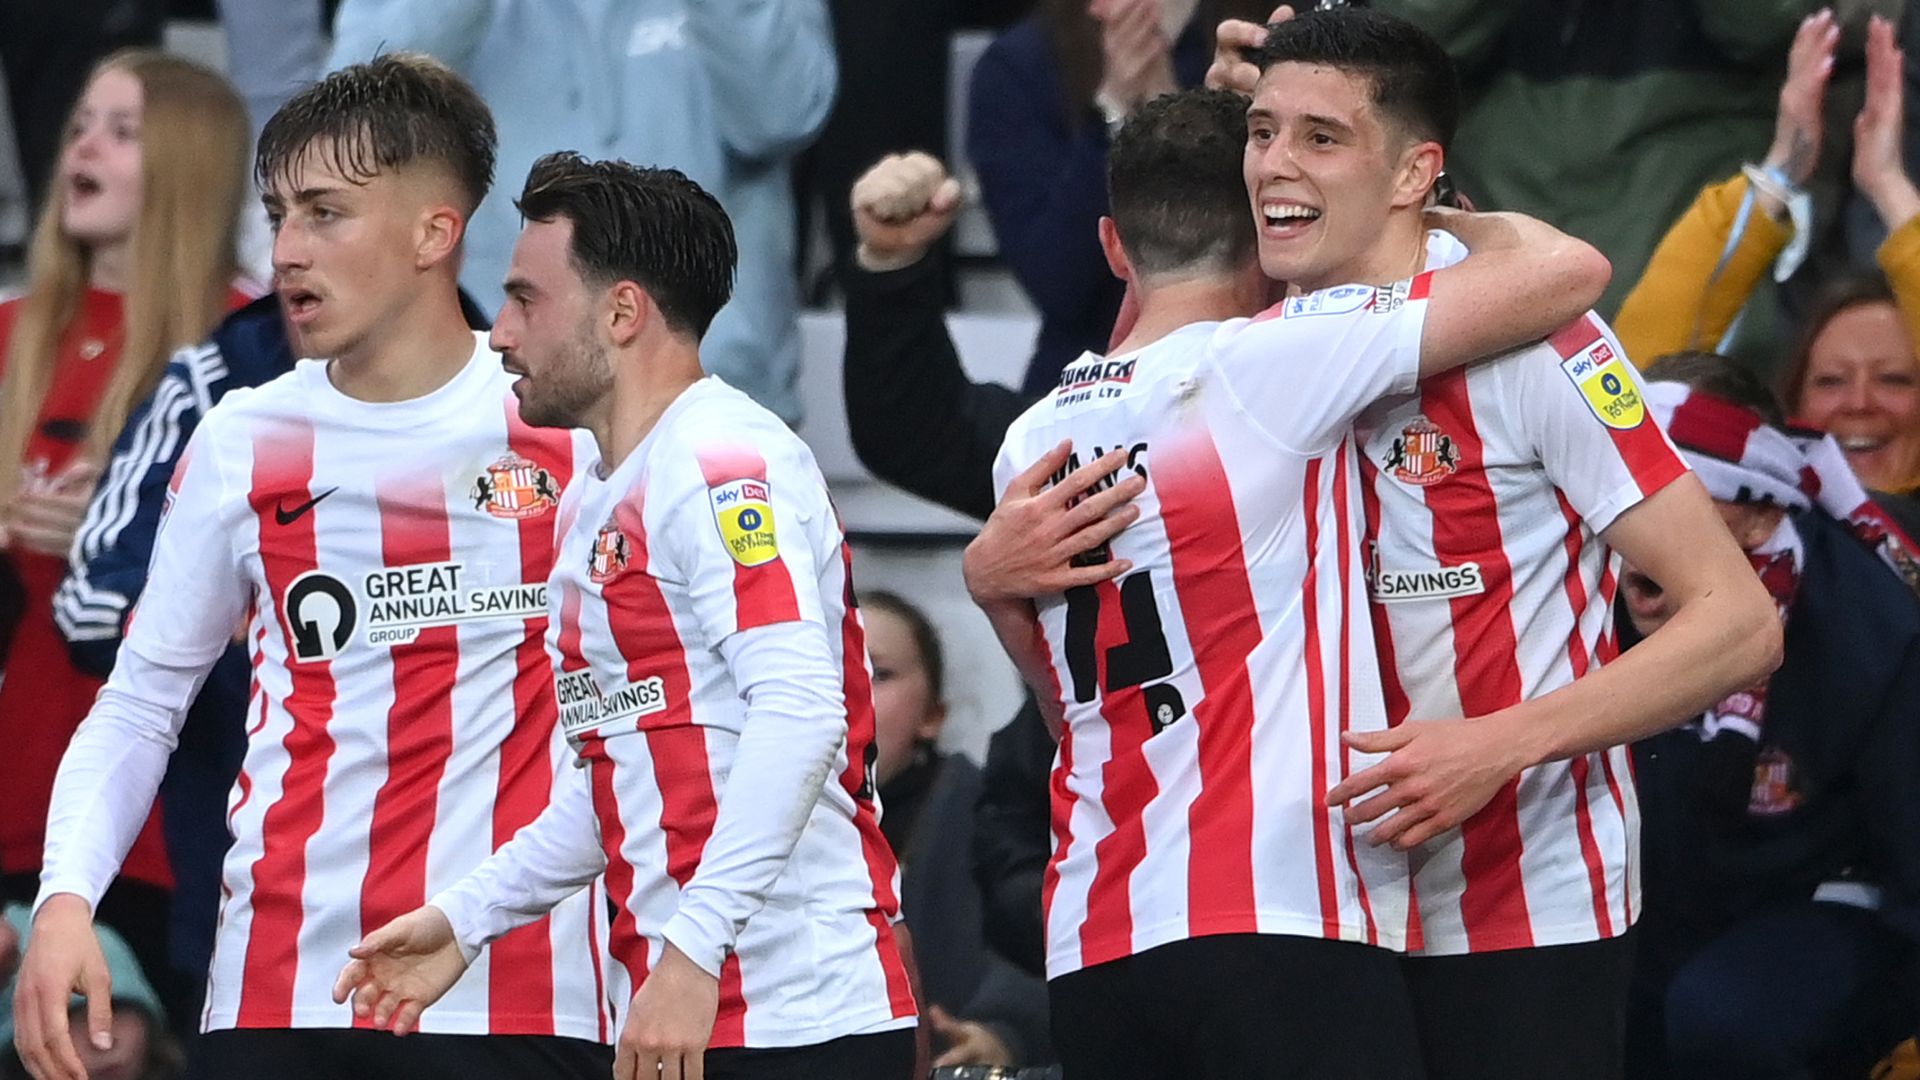 Sunderland edge Sheff Wed in first leg of play-off tie